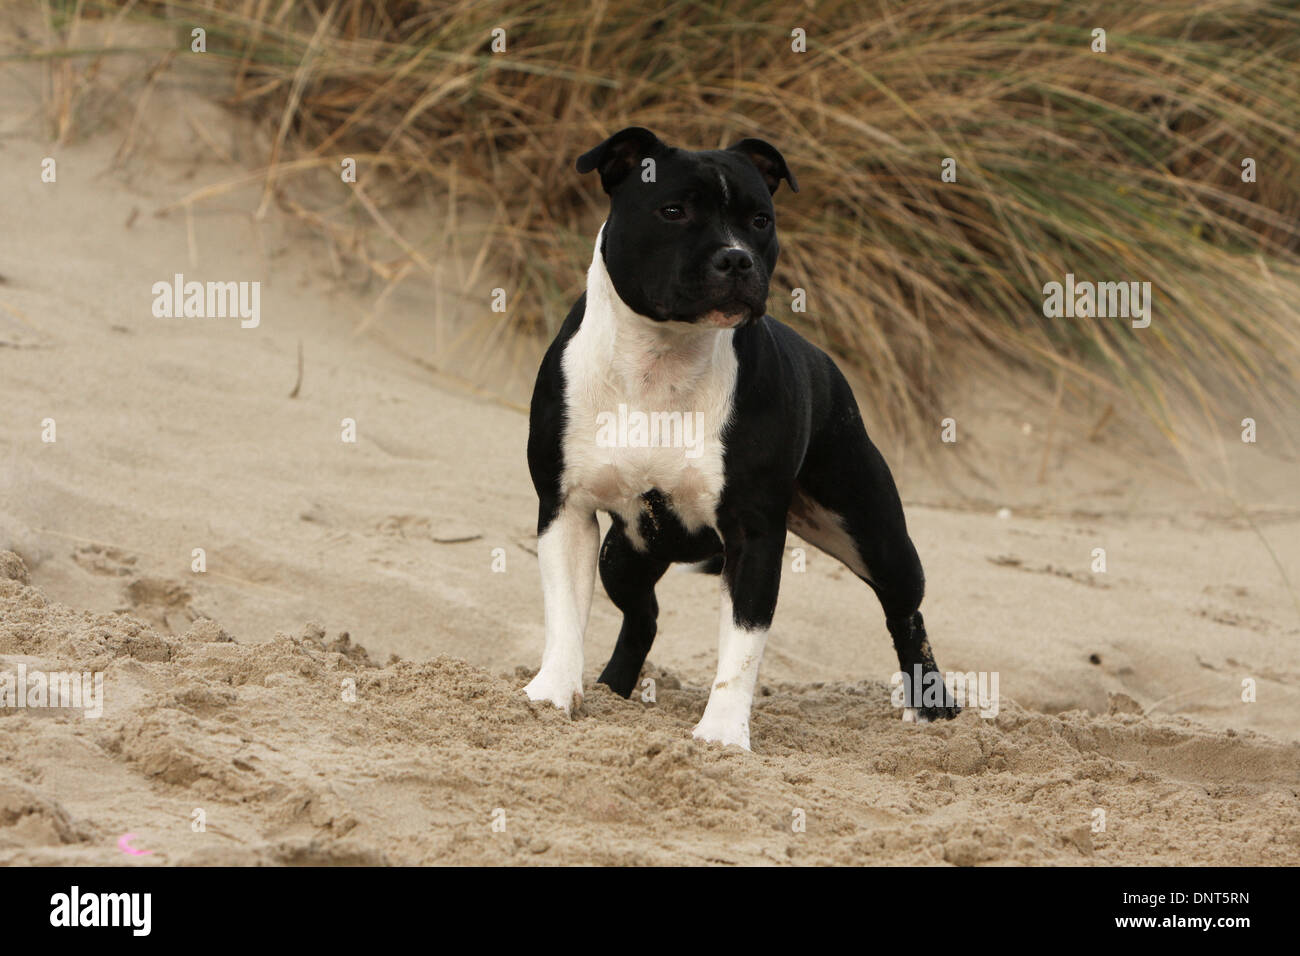 dog Staffordshire Bull Terrier / Staffie  adult standing in dunes Stock Photo